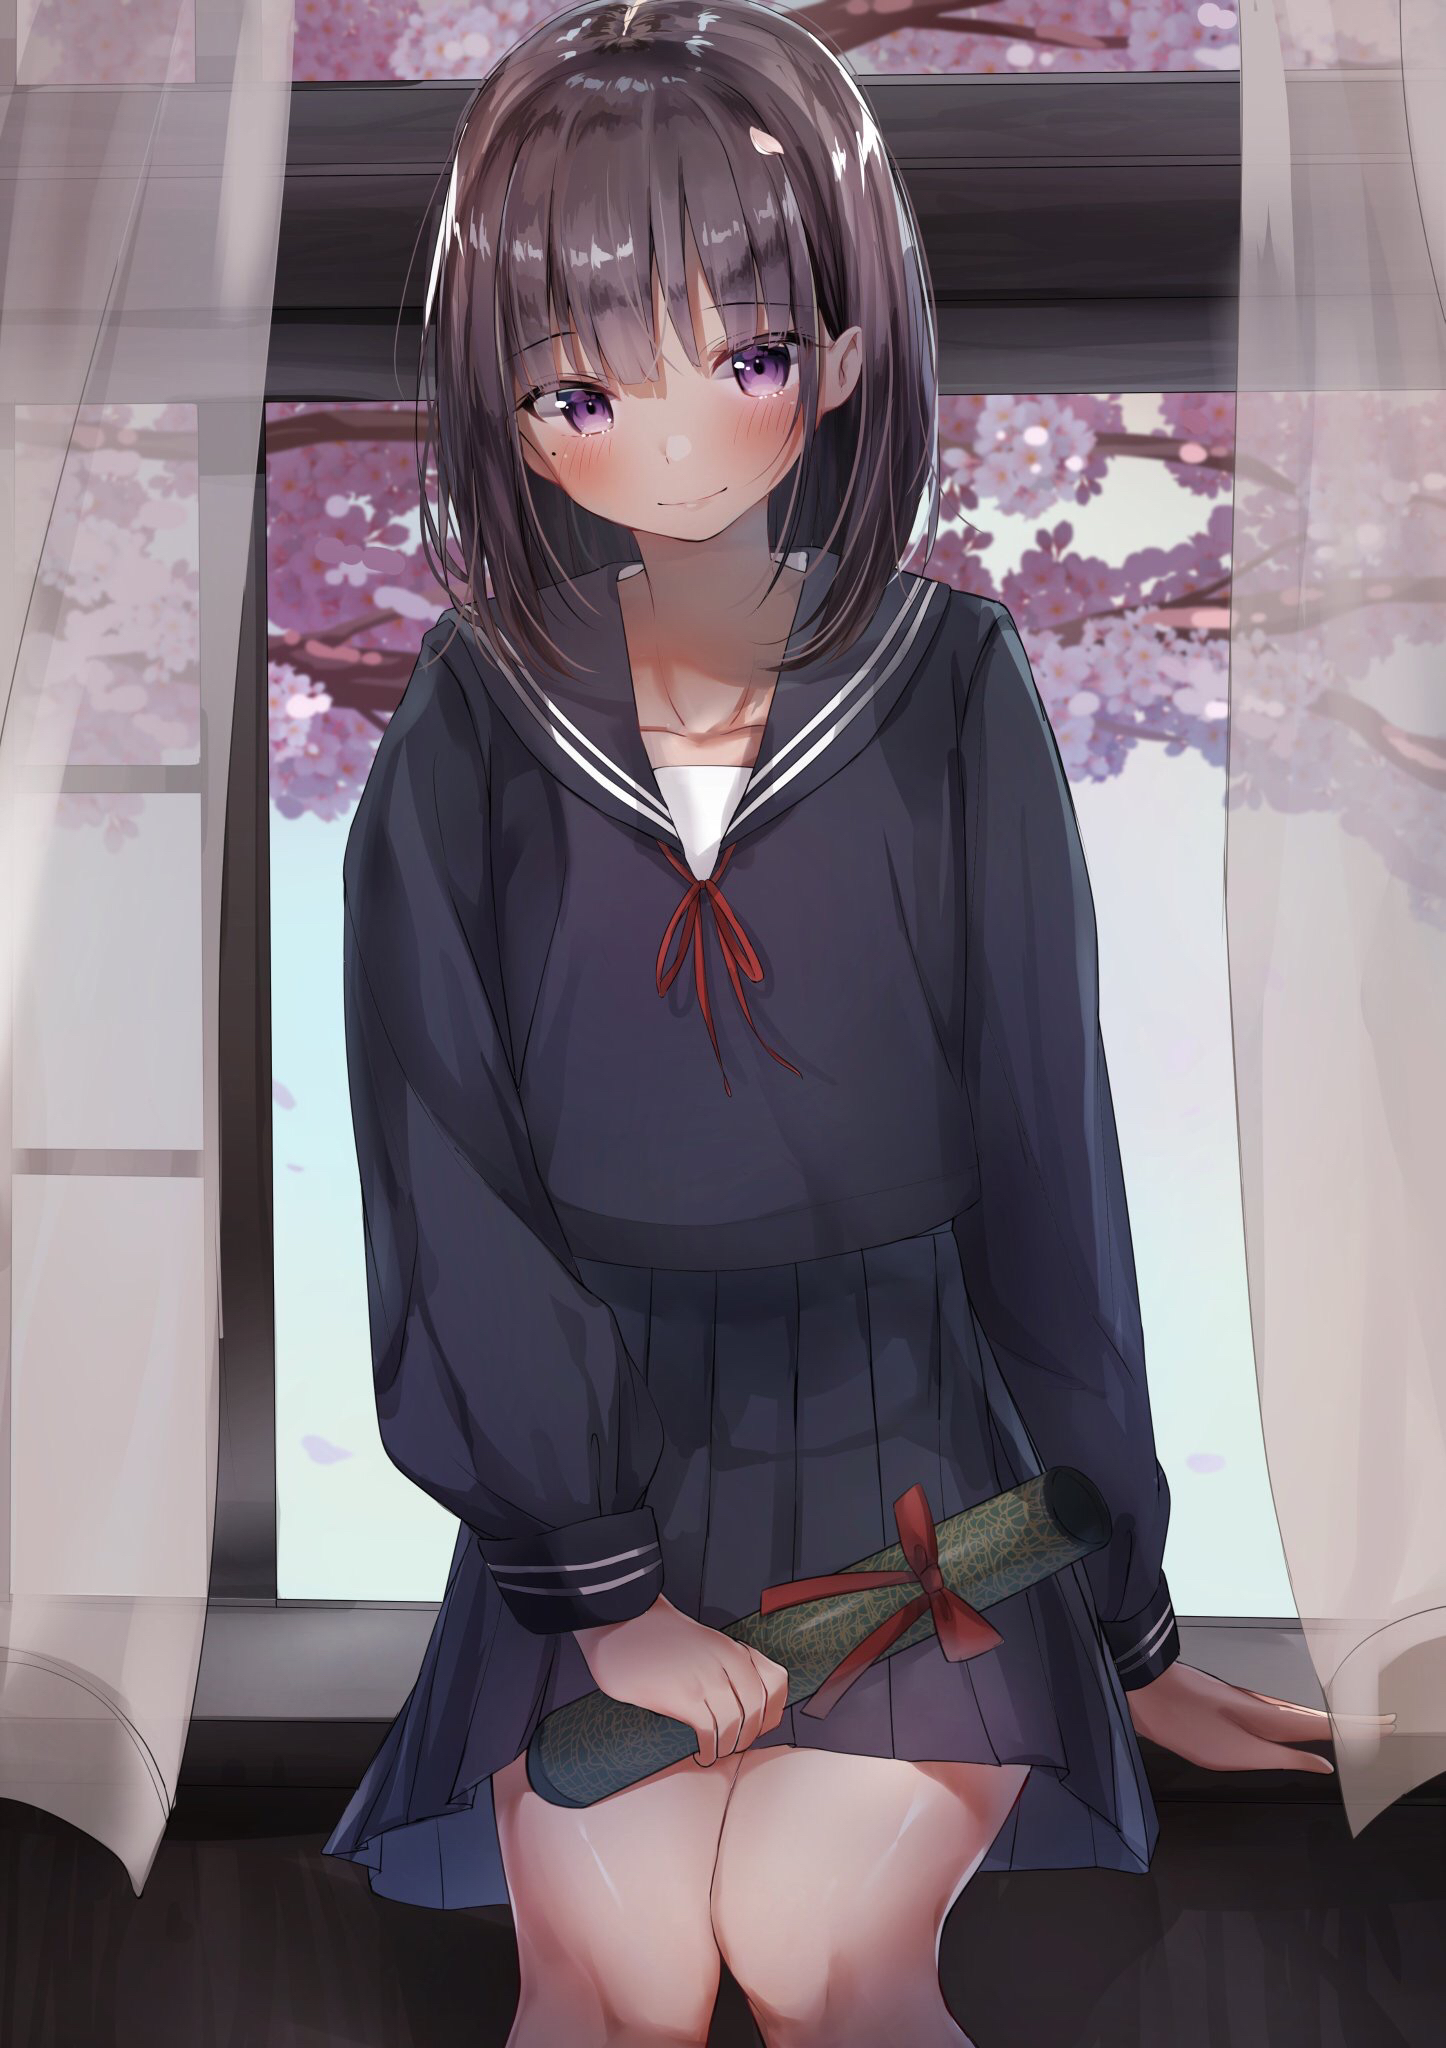 Meeting in the classroom after graduation [Original] : r/awwnime